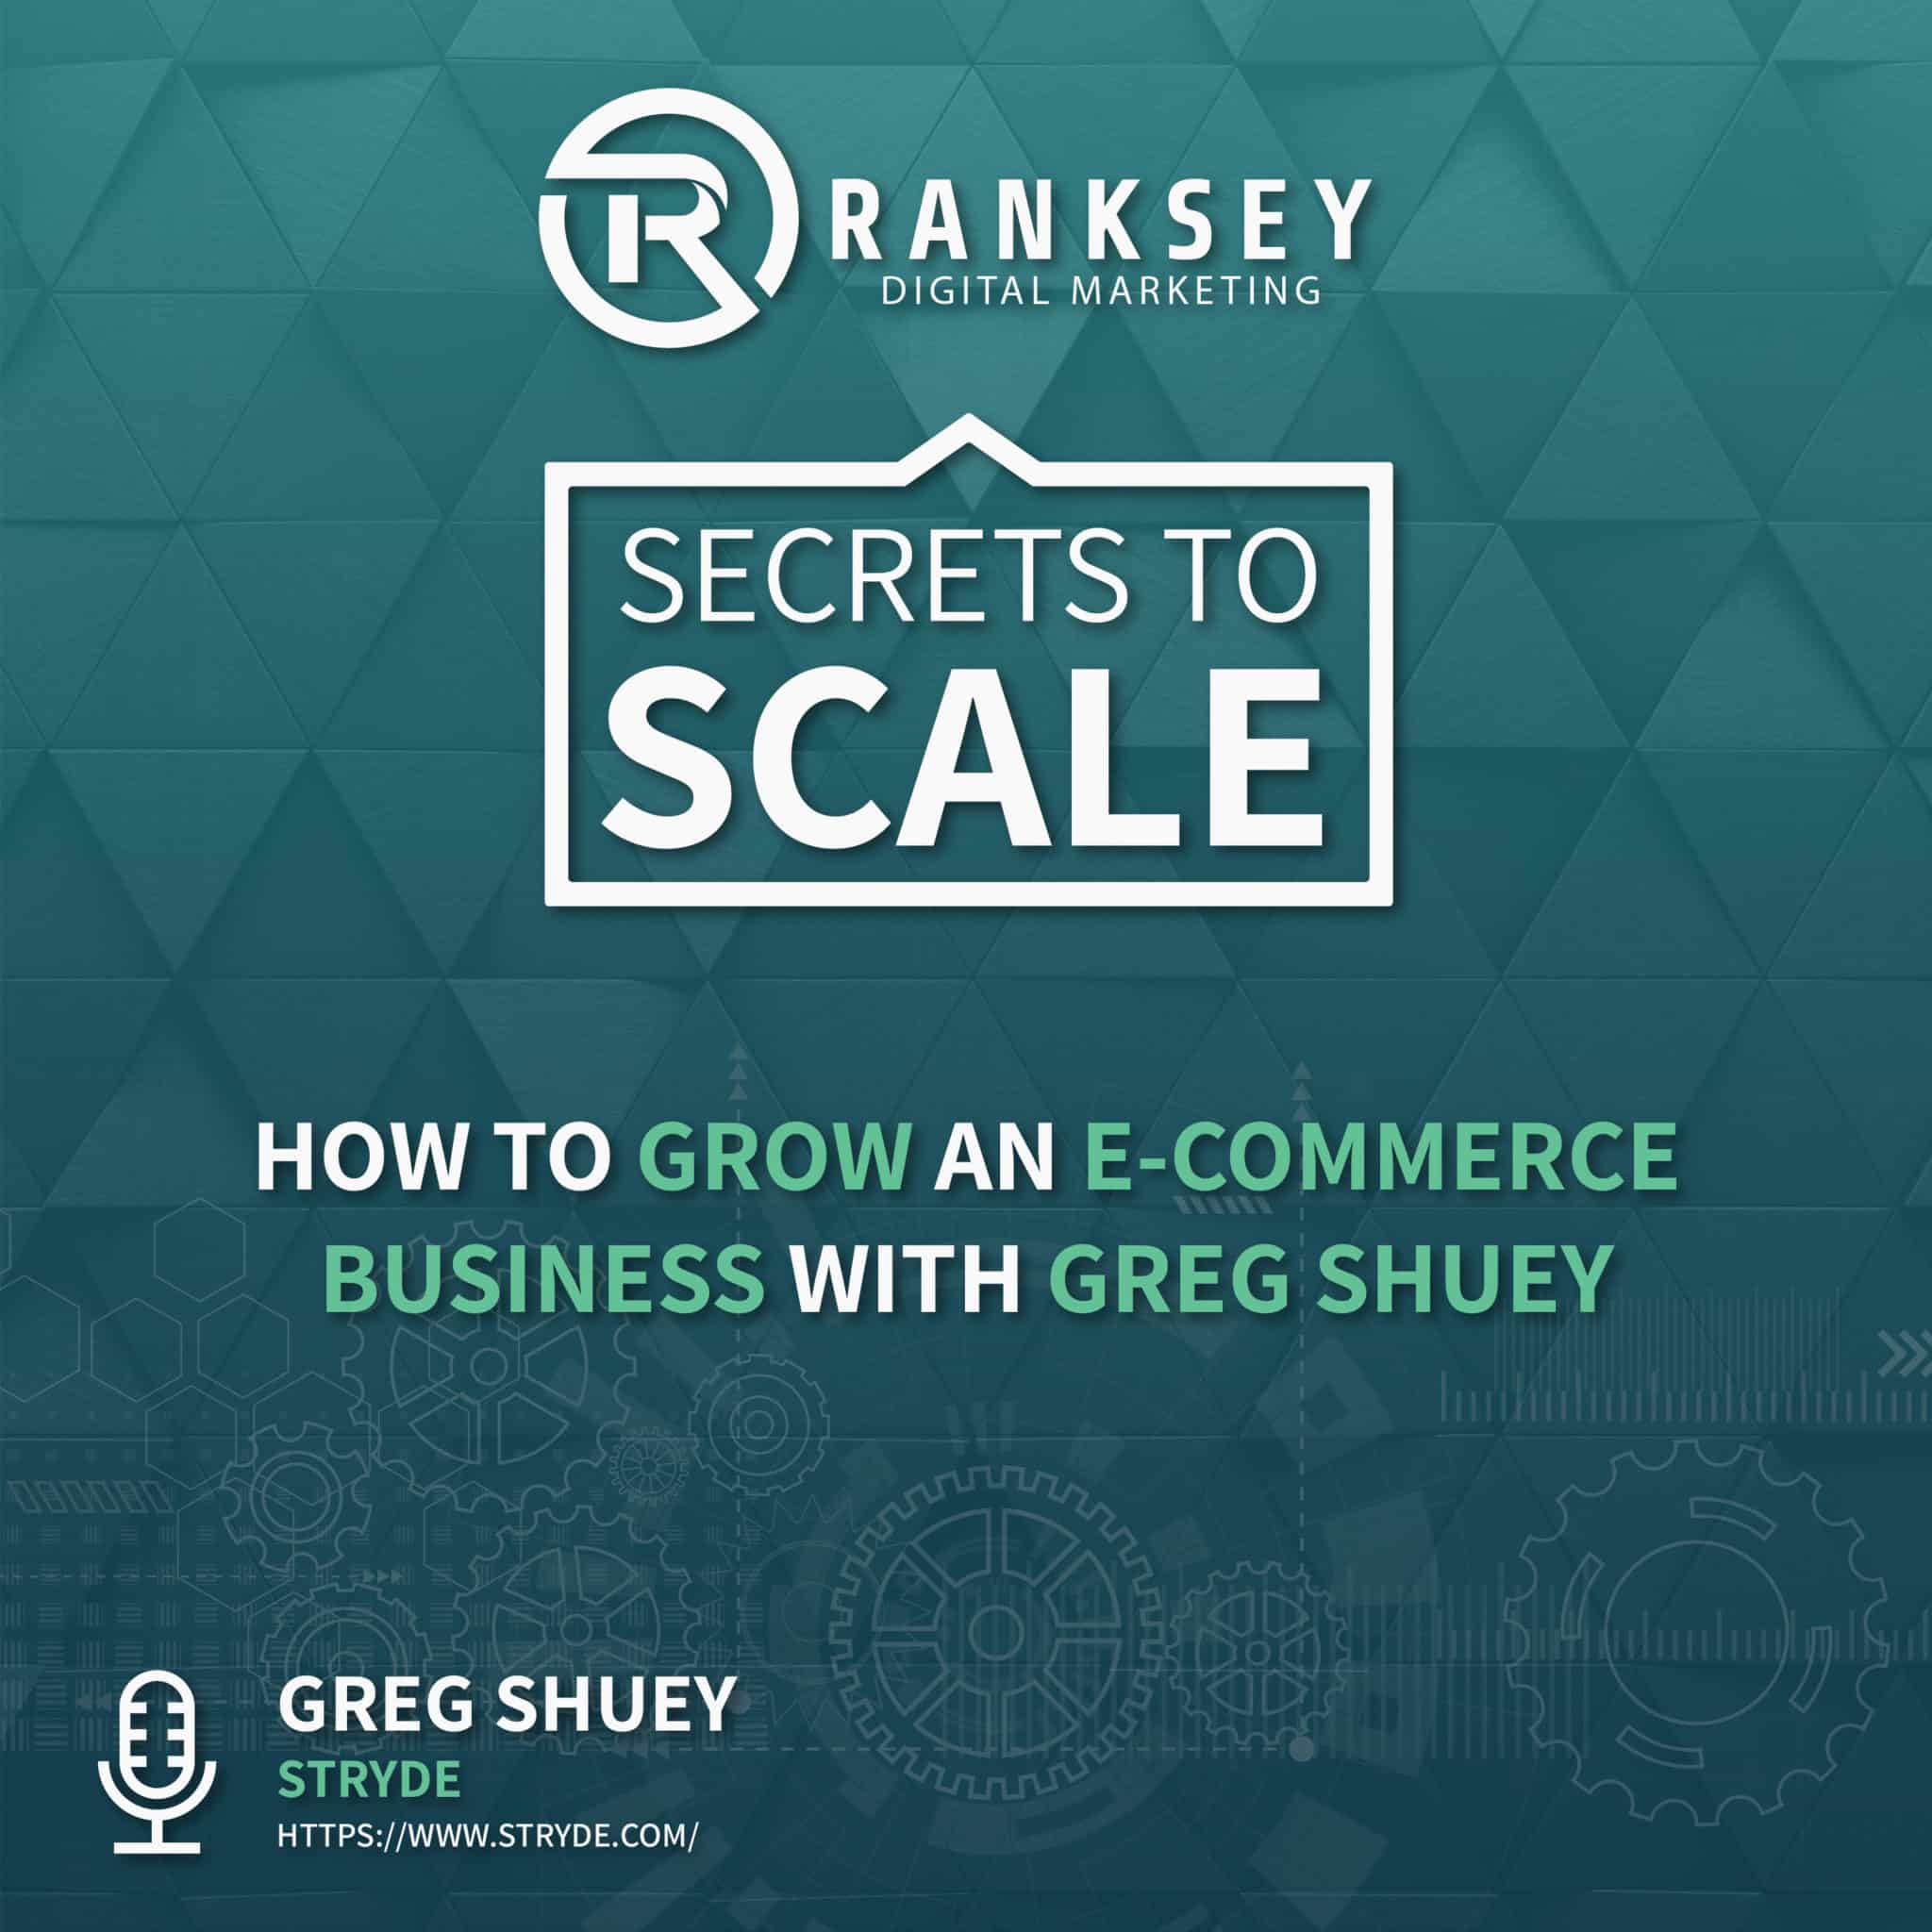 031 - How To Grow An E-Commerce Business With Greg Shuey